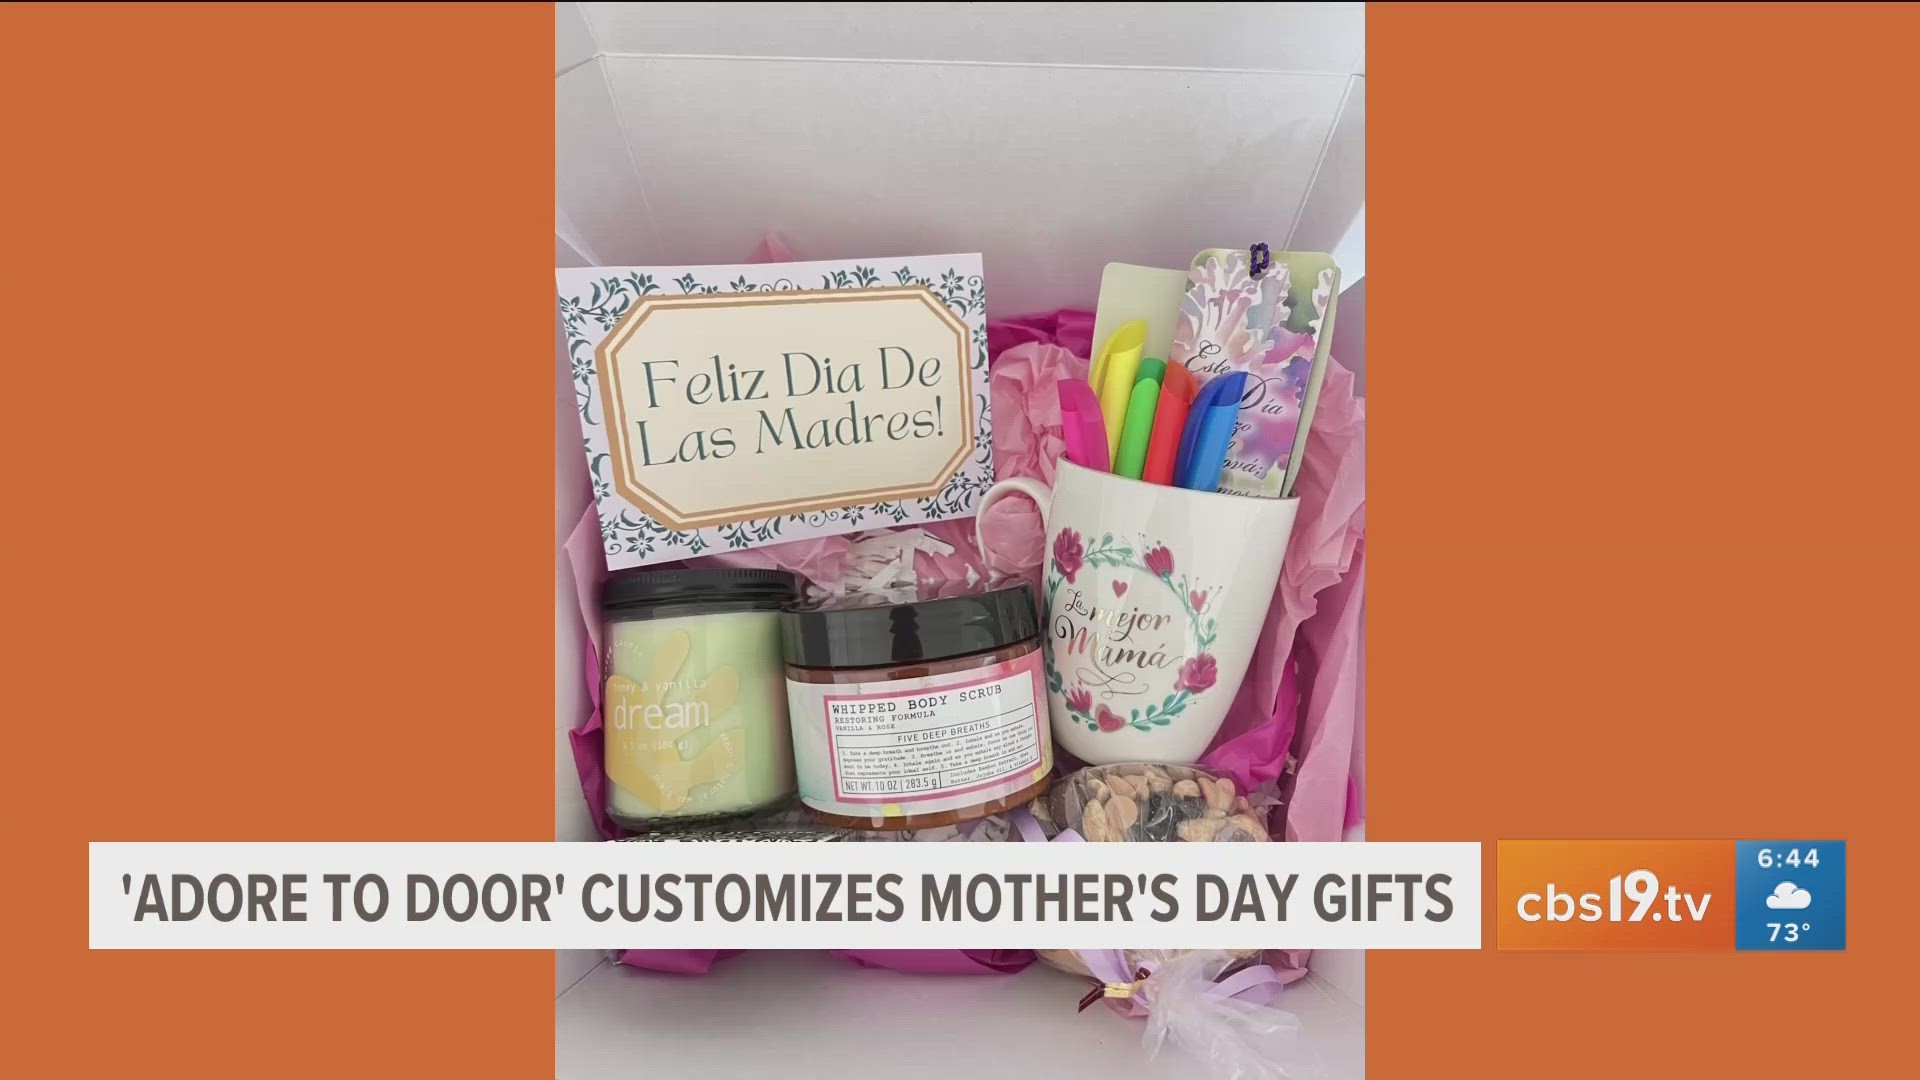 Get customized gifts for the ones you love!